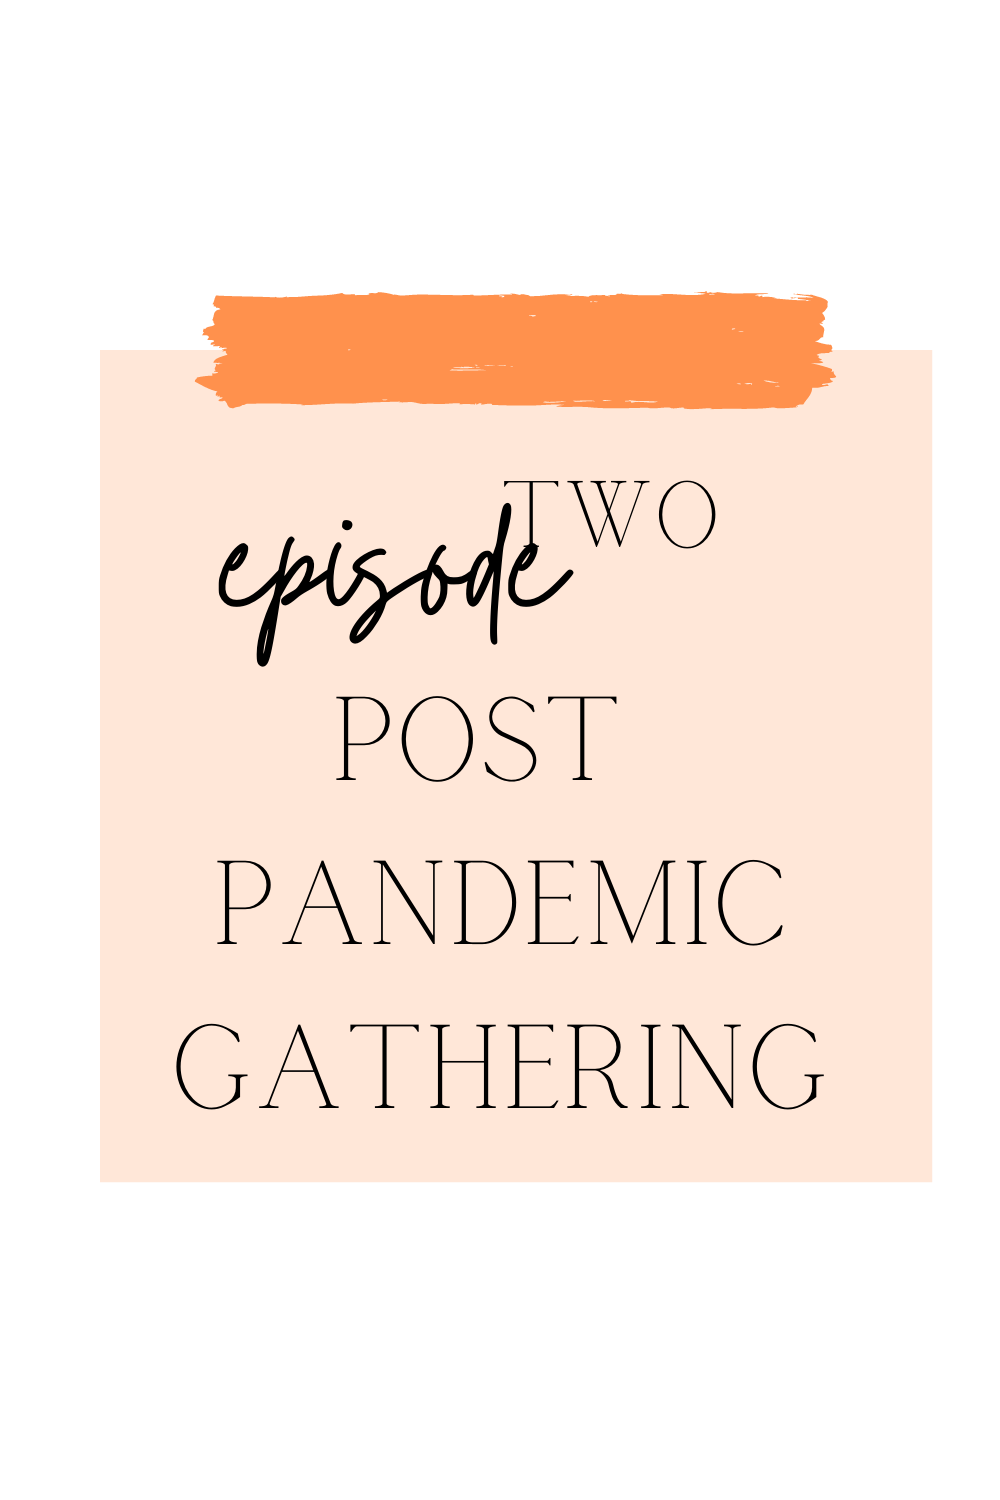 Episode 02 : WE SHARE RECIPES FOR YOUR POST PANDEMIC GATHERING